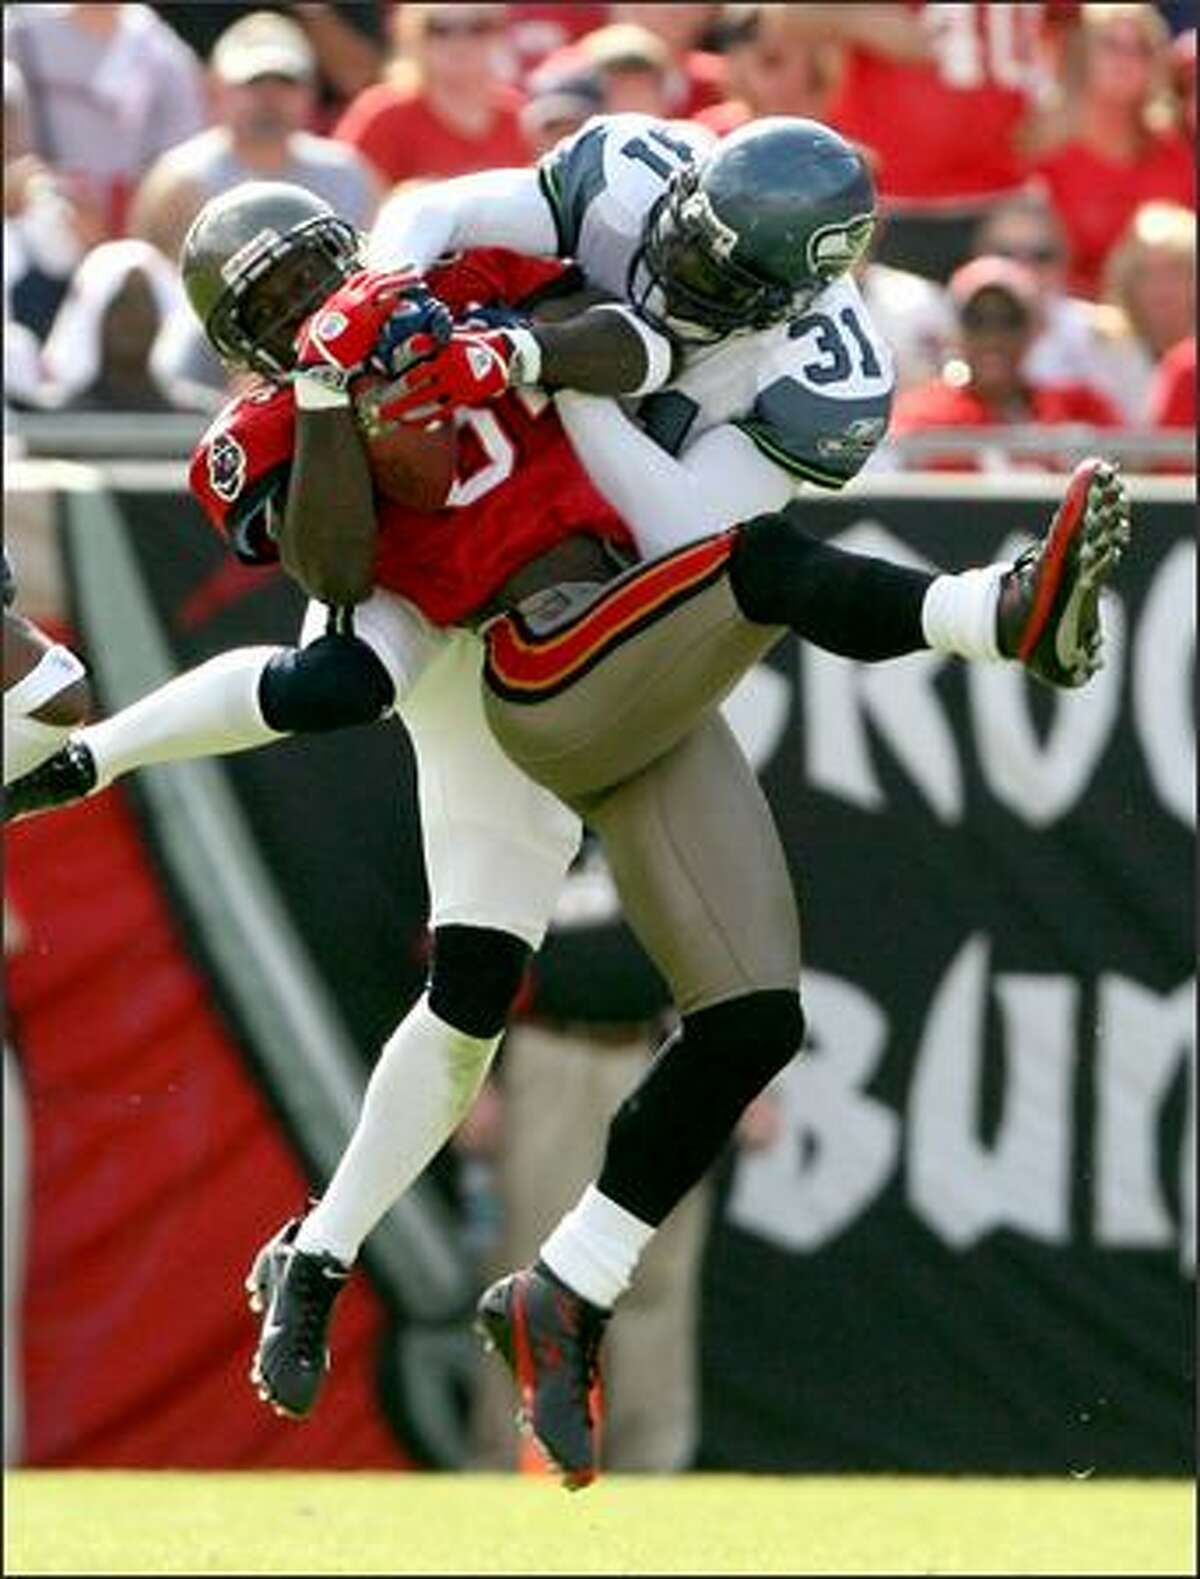 Kelly Herndon had tight coverage, but former Seahawk and current Buccaneer Joey Galloway was able go haul in this 44-yard pass in the first quarter.